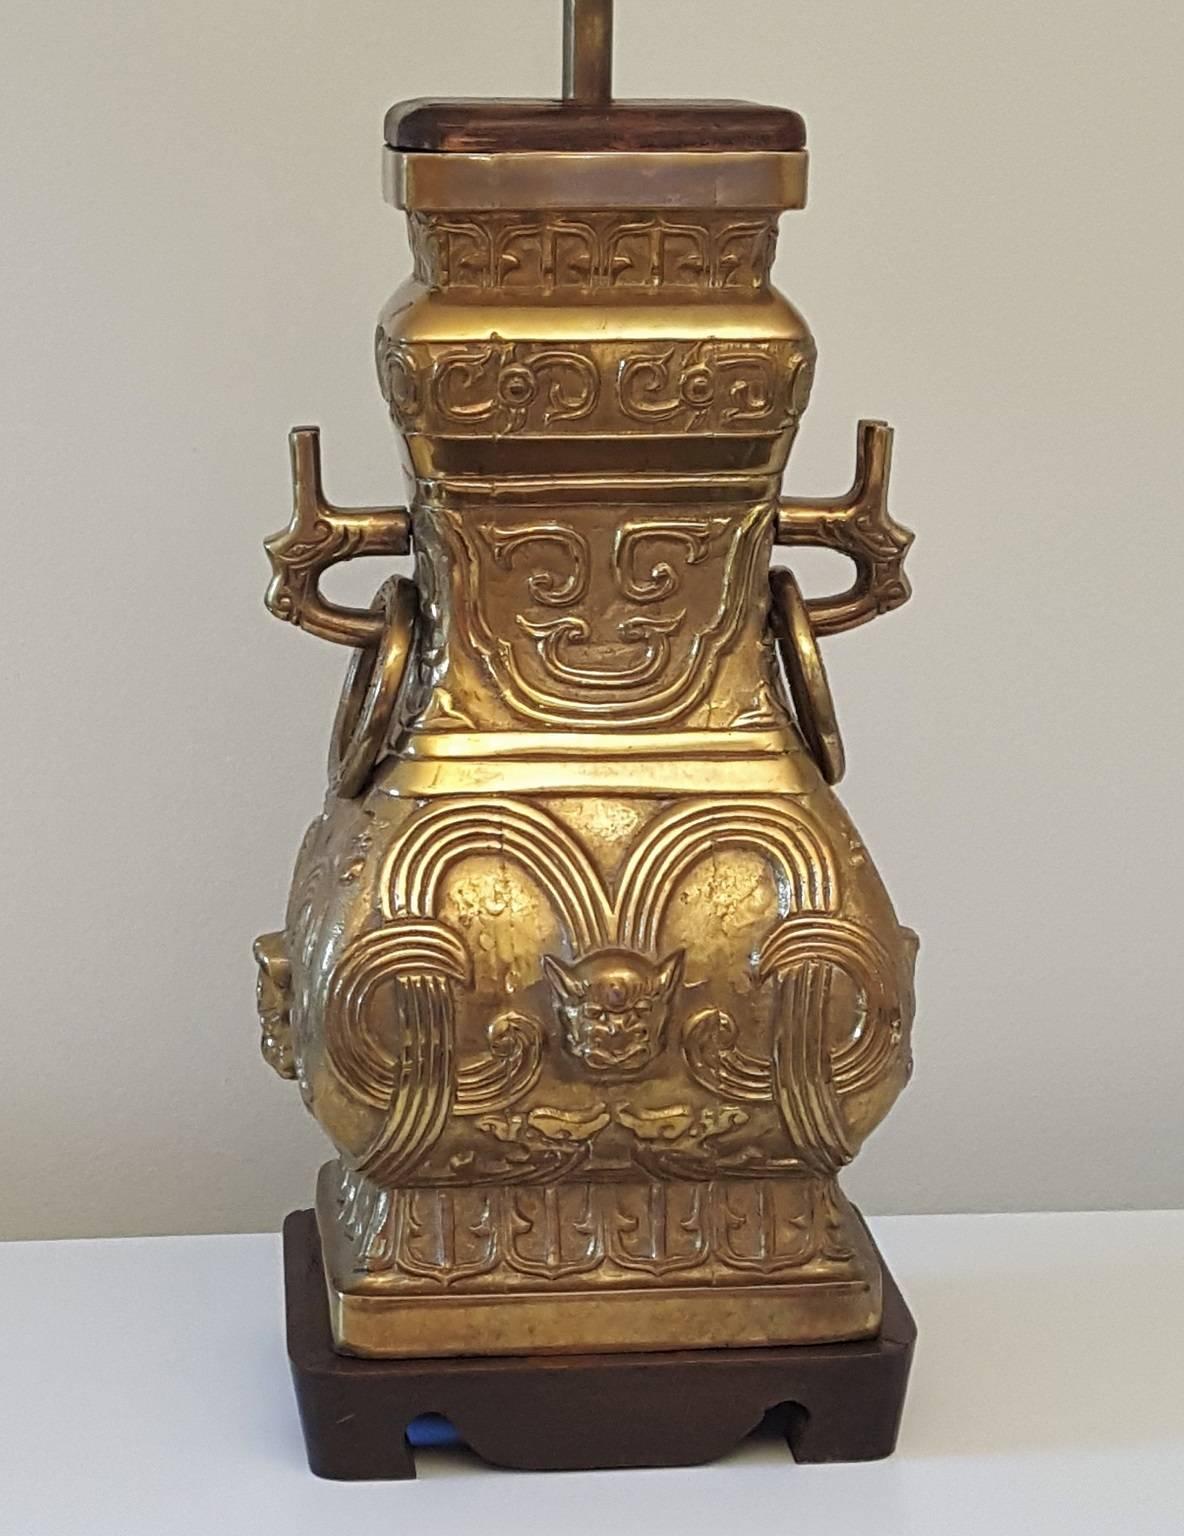 Incredible pair of massive Chinese style archaic bronze or brass urn vessels mounted as table lamps. Gorgeous antiqued patina completes the effect of these pieces. Each lamp weighs over 20 pounds and is made of solid bronze or brass except the wood